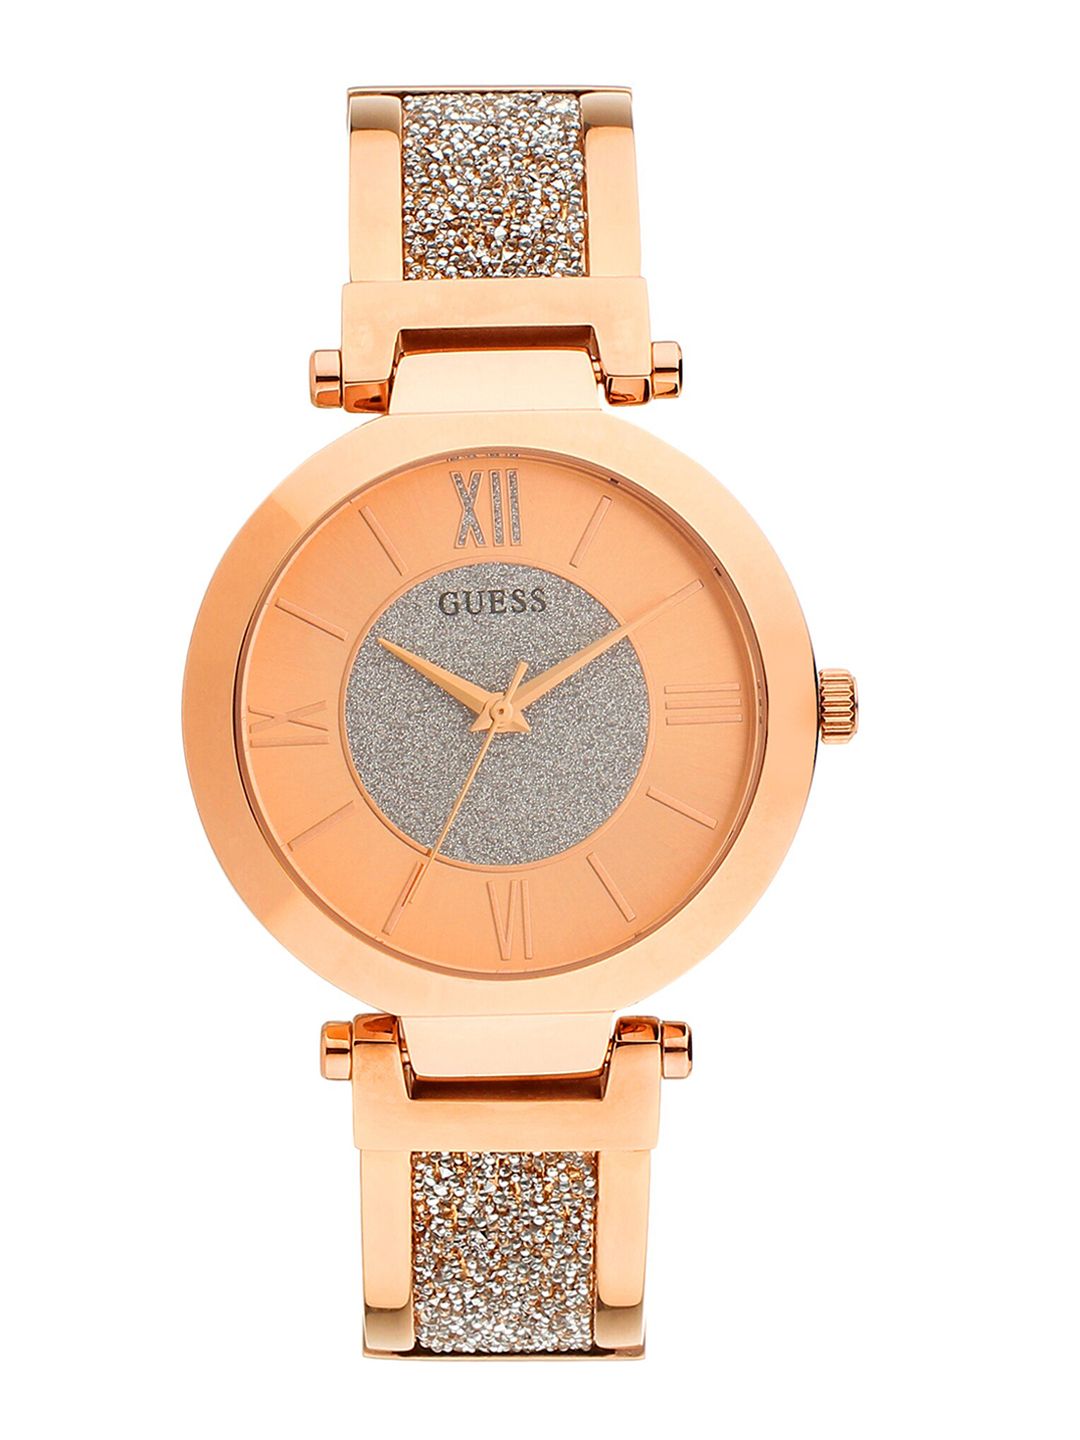 GUESS Women Rose Gold-Toned Embellished Dial Watch W1288L3-Rose Gold-Plated Price in India